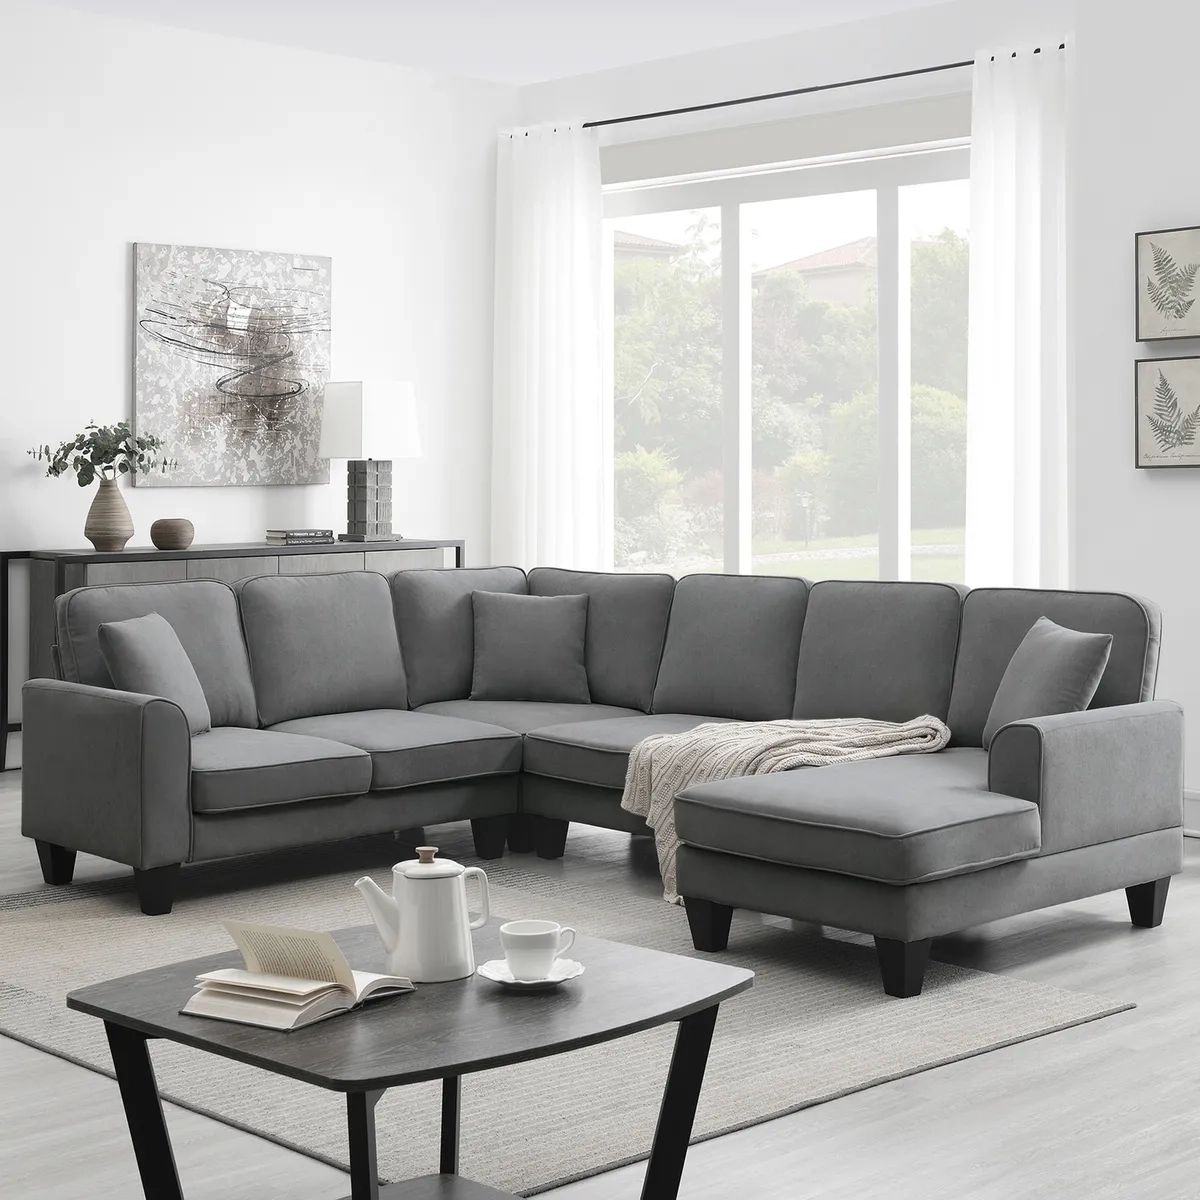 7 Seat Sectional Sofa Set Modern Furniture U Shape Couch Living Room, 3  Pillow | Ebay For Modern U Shaped Sectional Couch Sets (View 3 of 15)